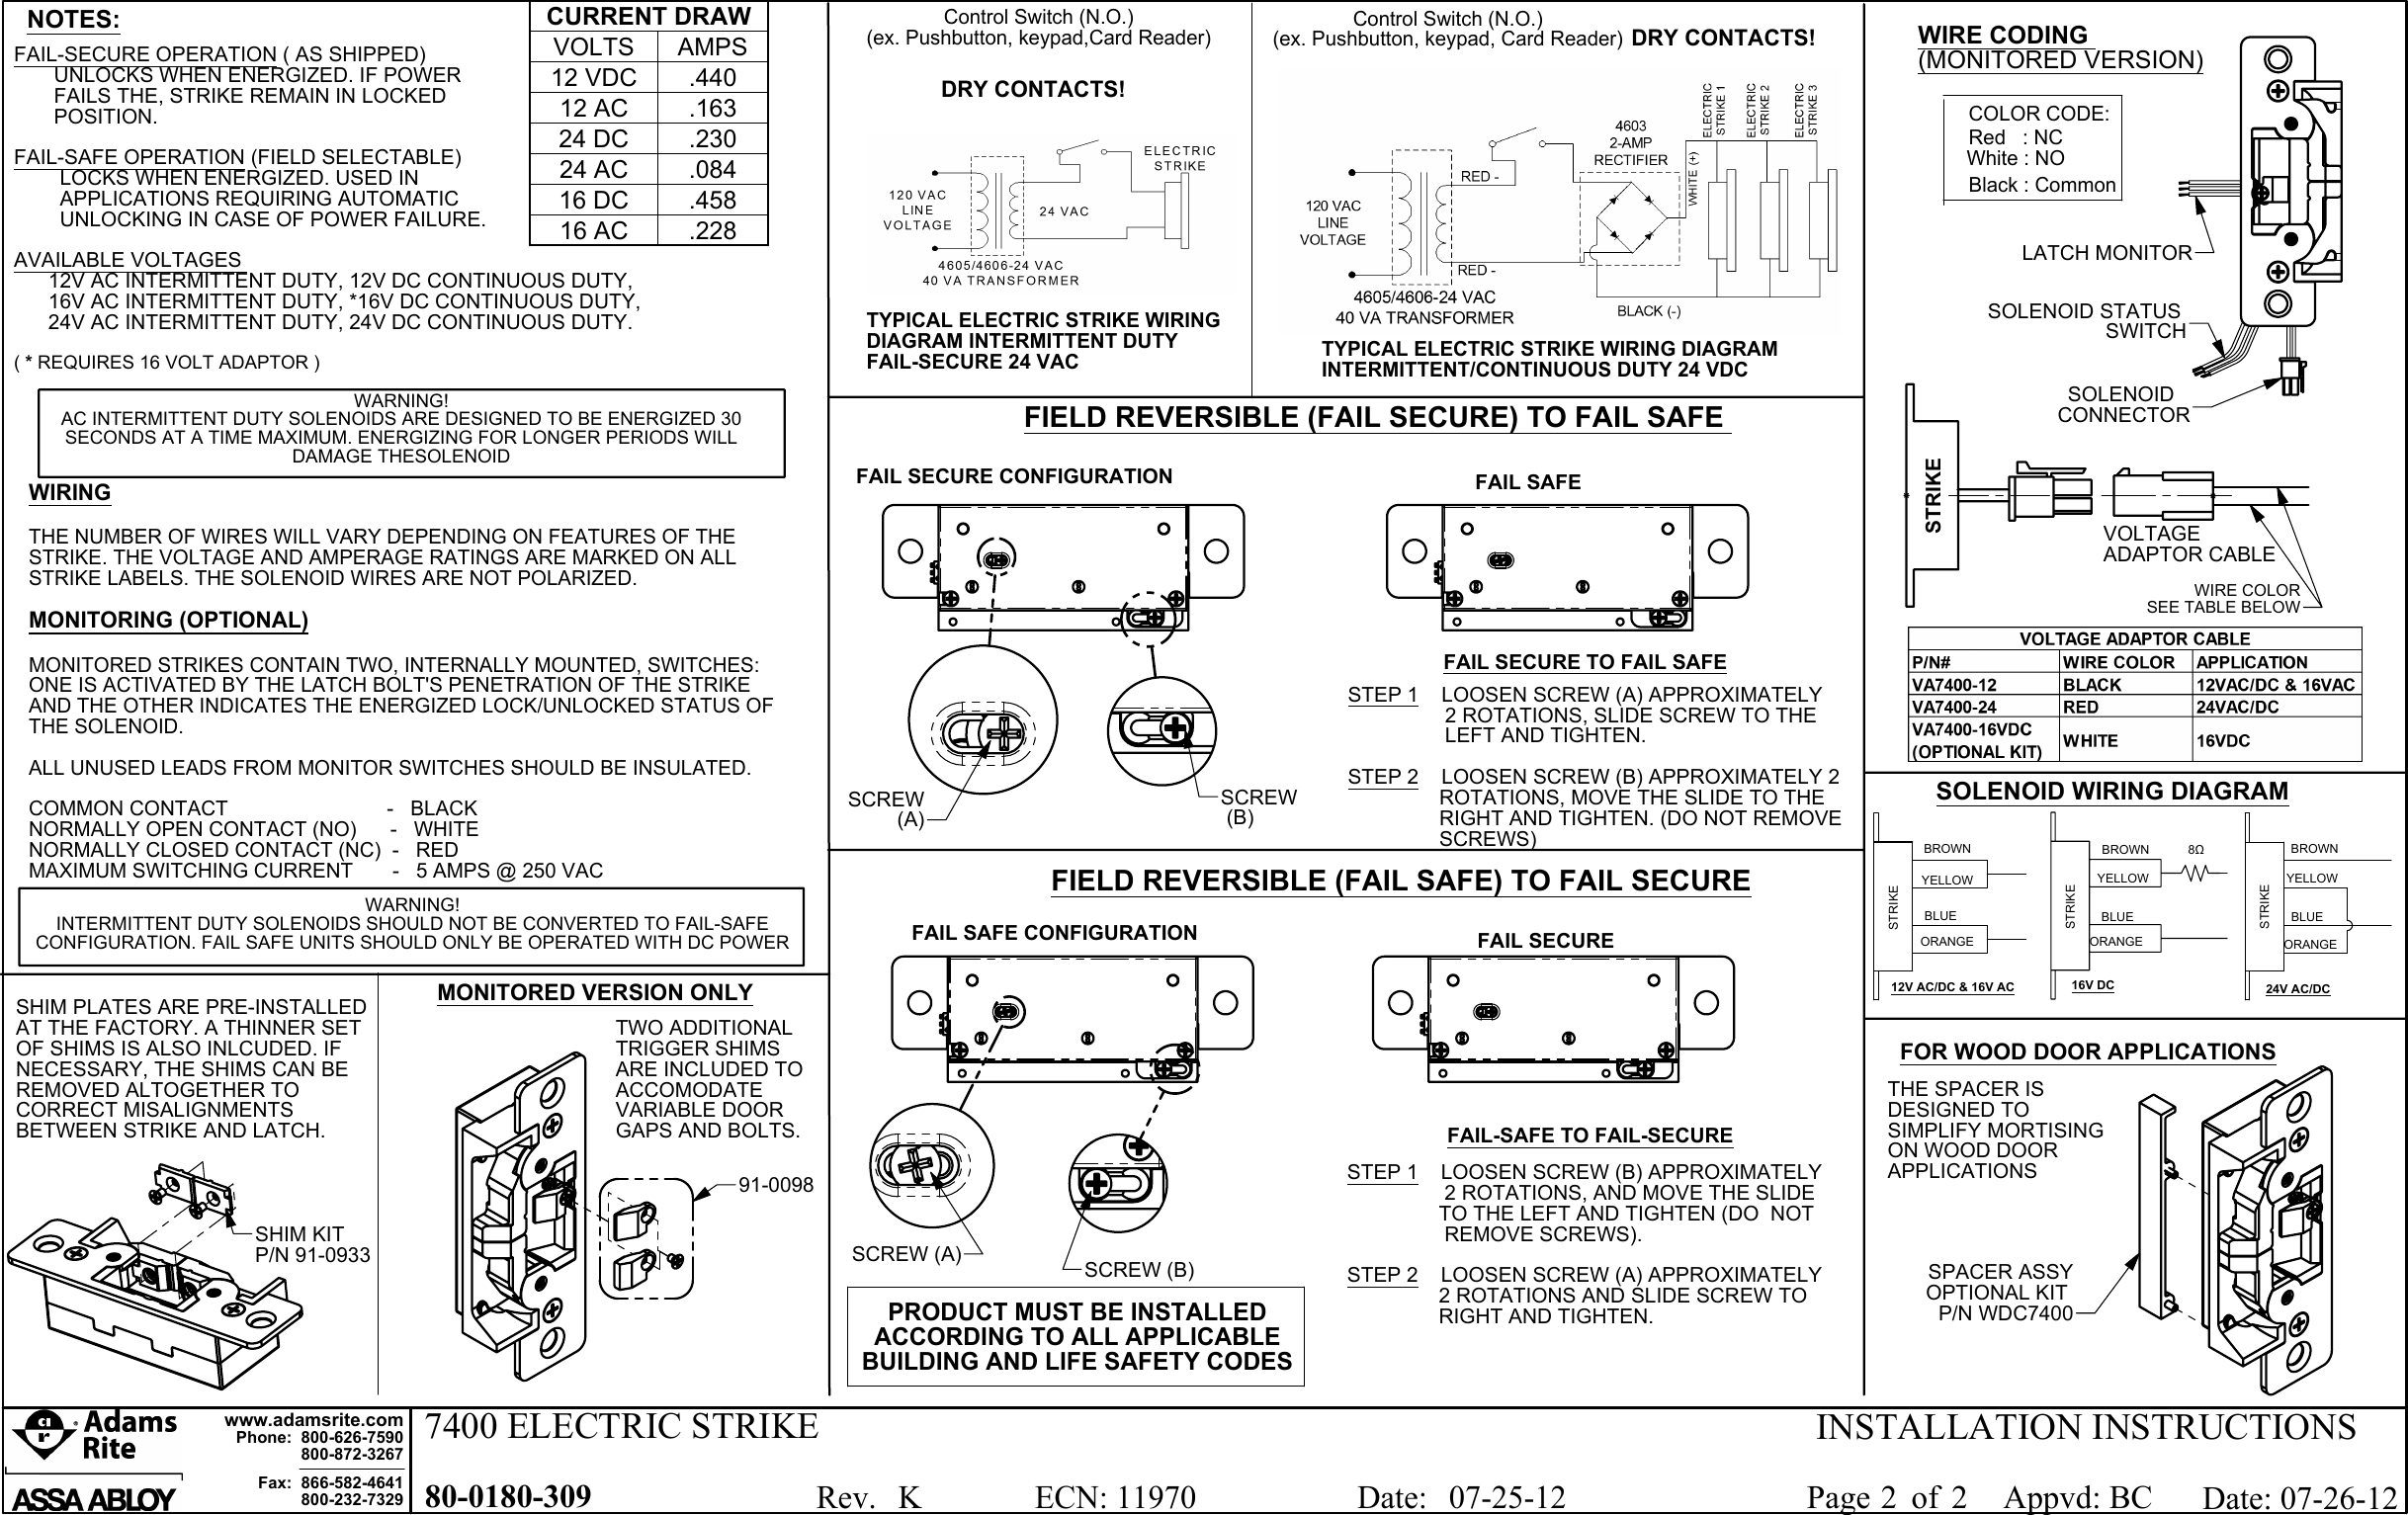 Page 2 of 2 - Adams Rite 80-0180-309_K 7400 Series Electric Strikes Installation Instructions ES7400 80-0180-309 K